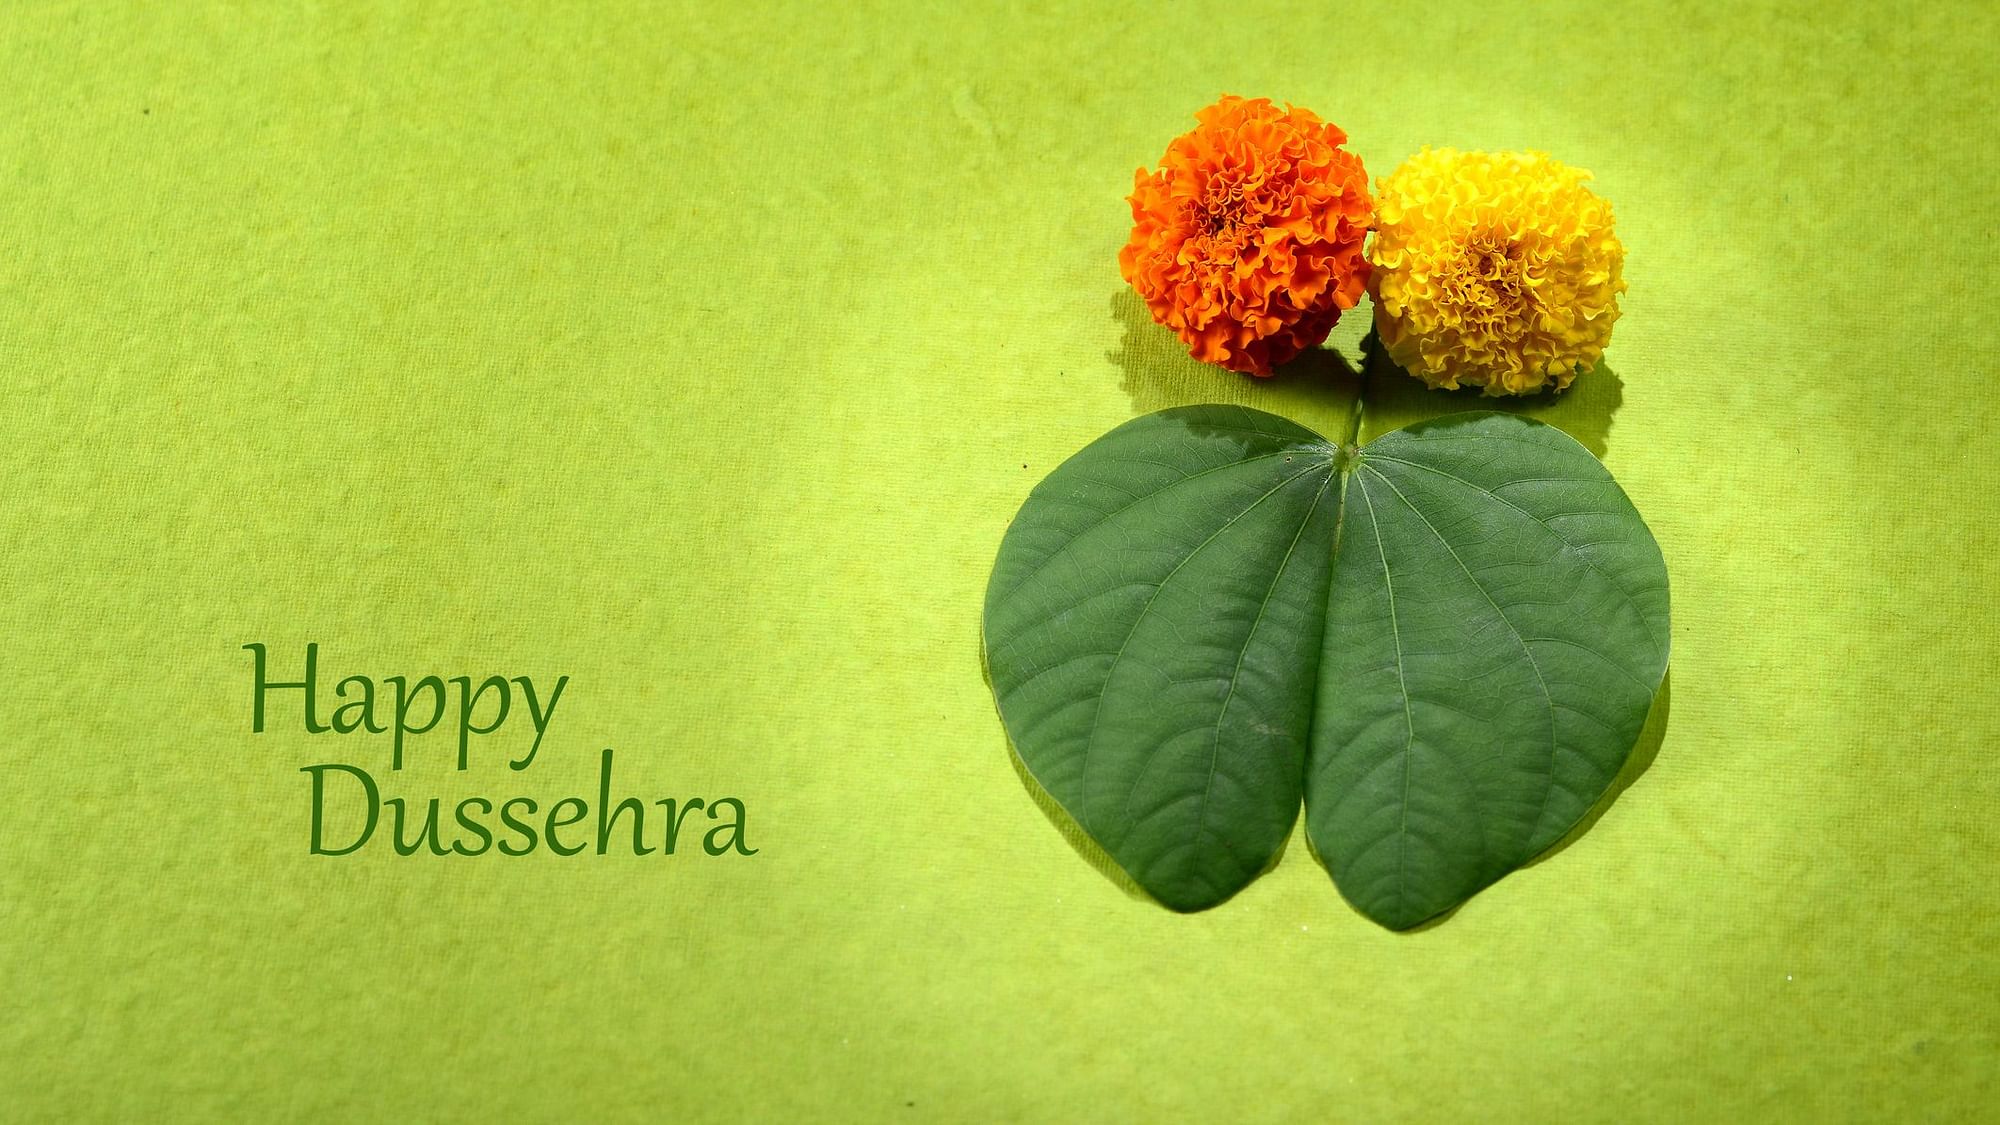 Dussehra/Vijayadashami 2019 Wishes, Greetings, Images with Quotes.